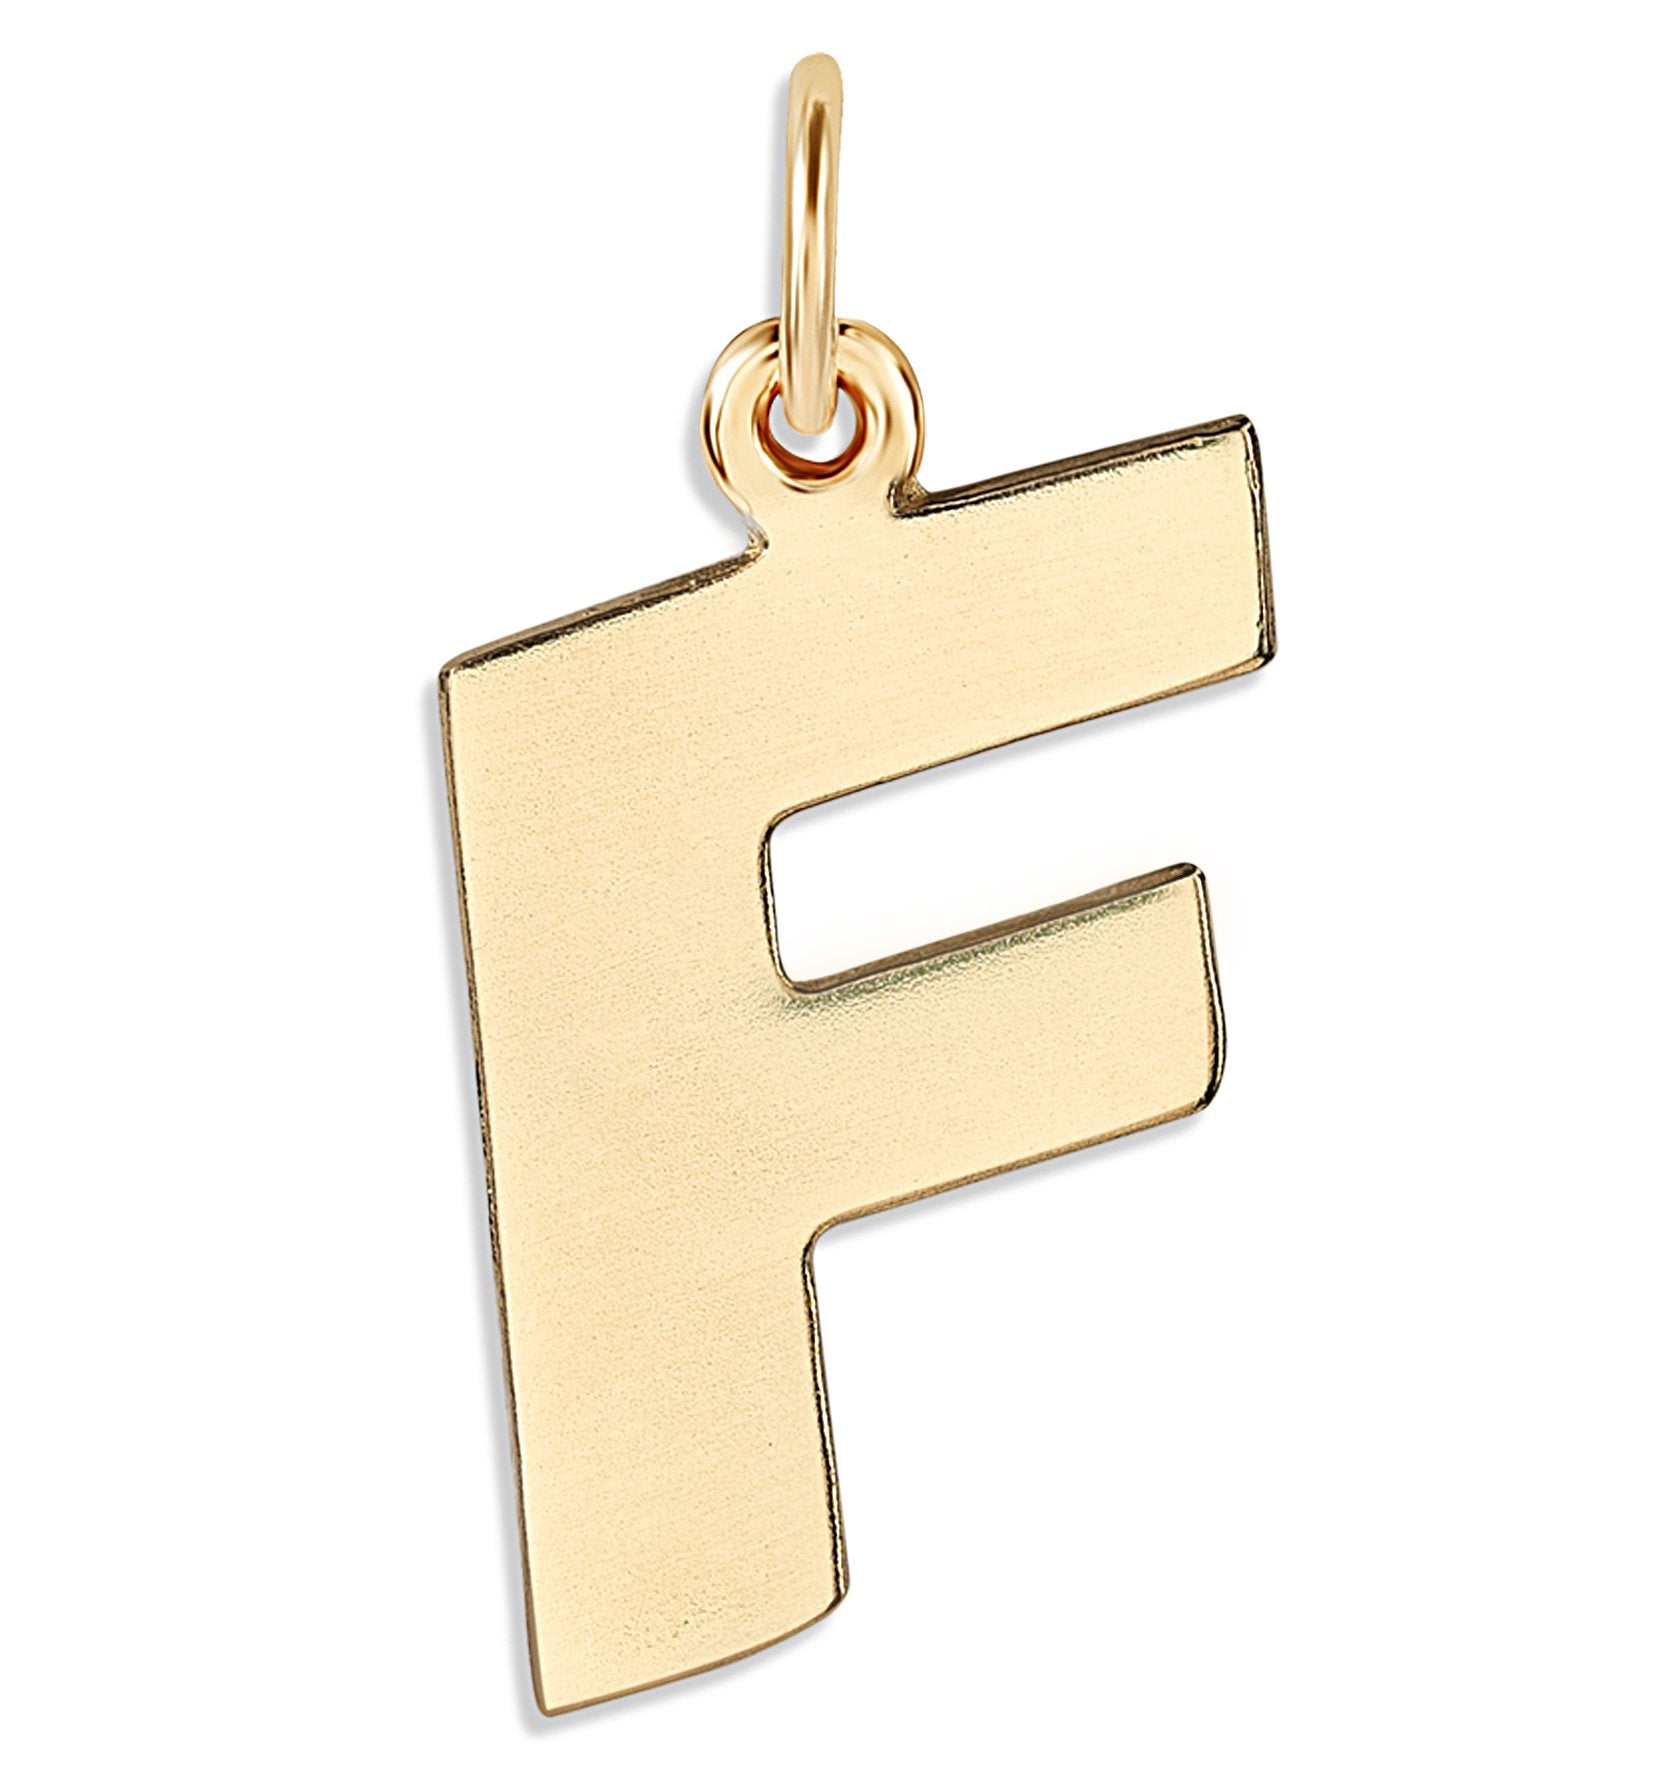 Letter Charm with Diamonds | Diamond Necklace Pendant with Initial 14K Yellow Gold by Helen Ficalora